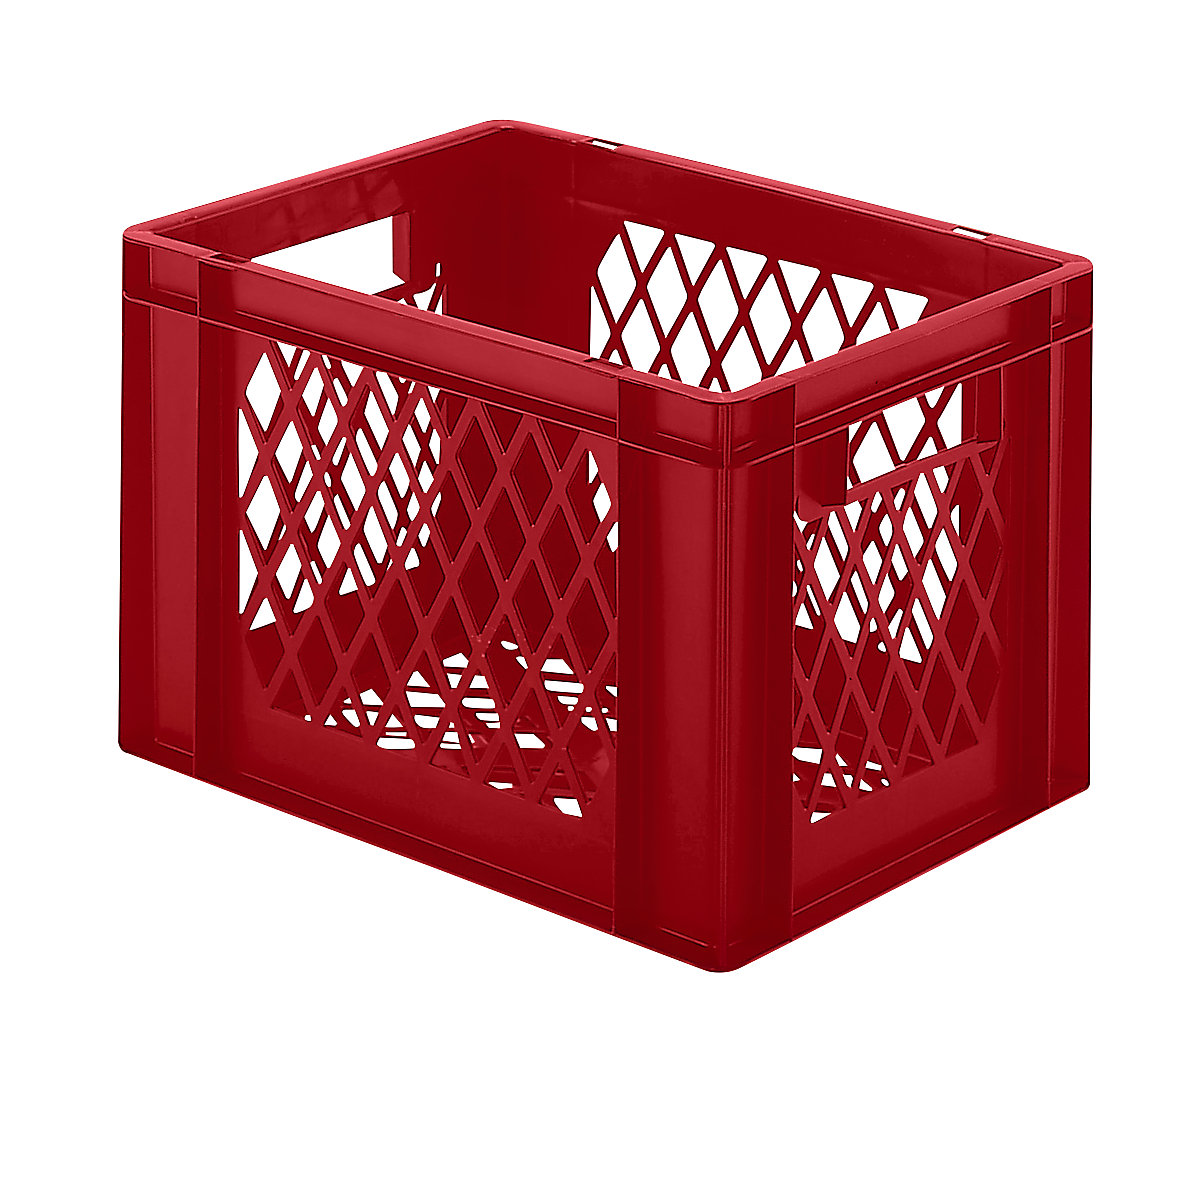 Euro stacking container, perforated walls and base, LxWxH 400 x 300 x 266 mm, red, pack of 5